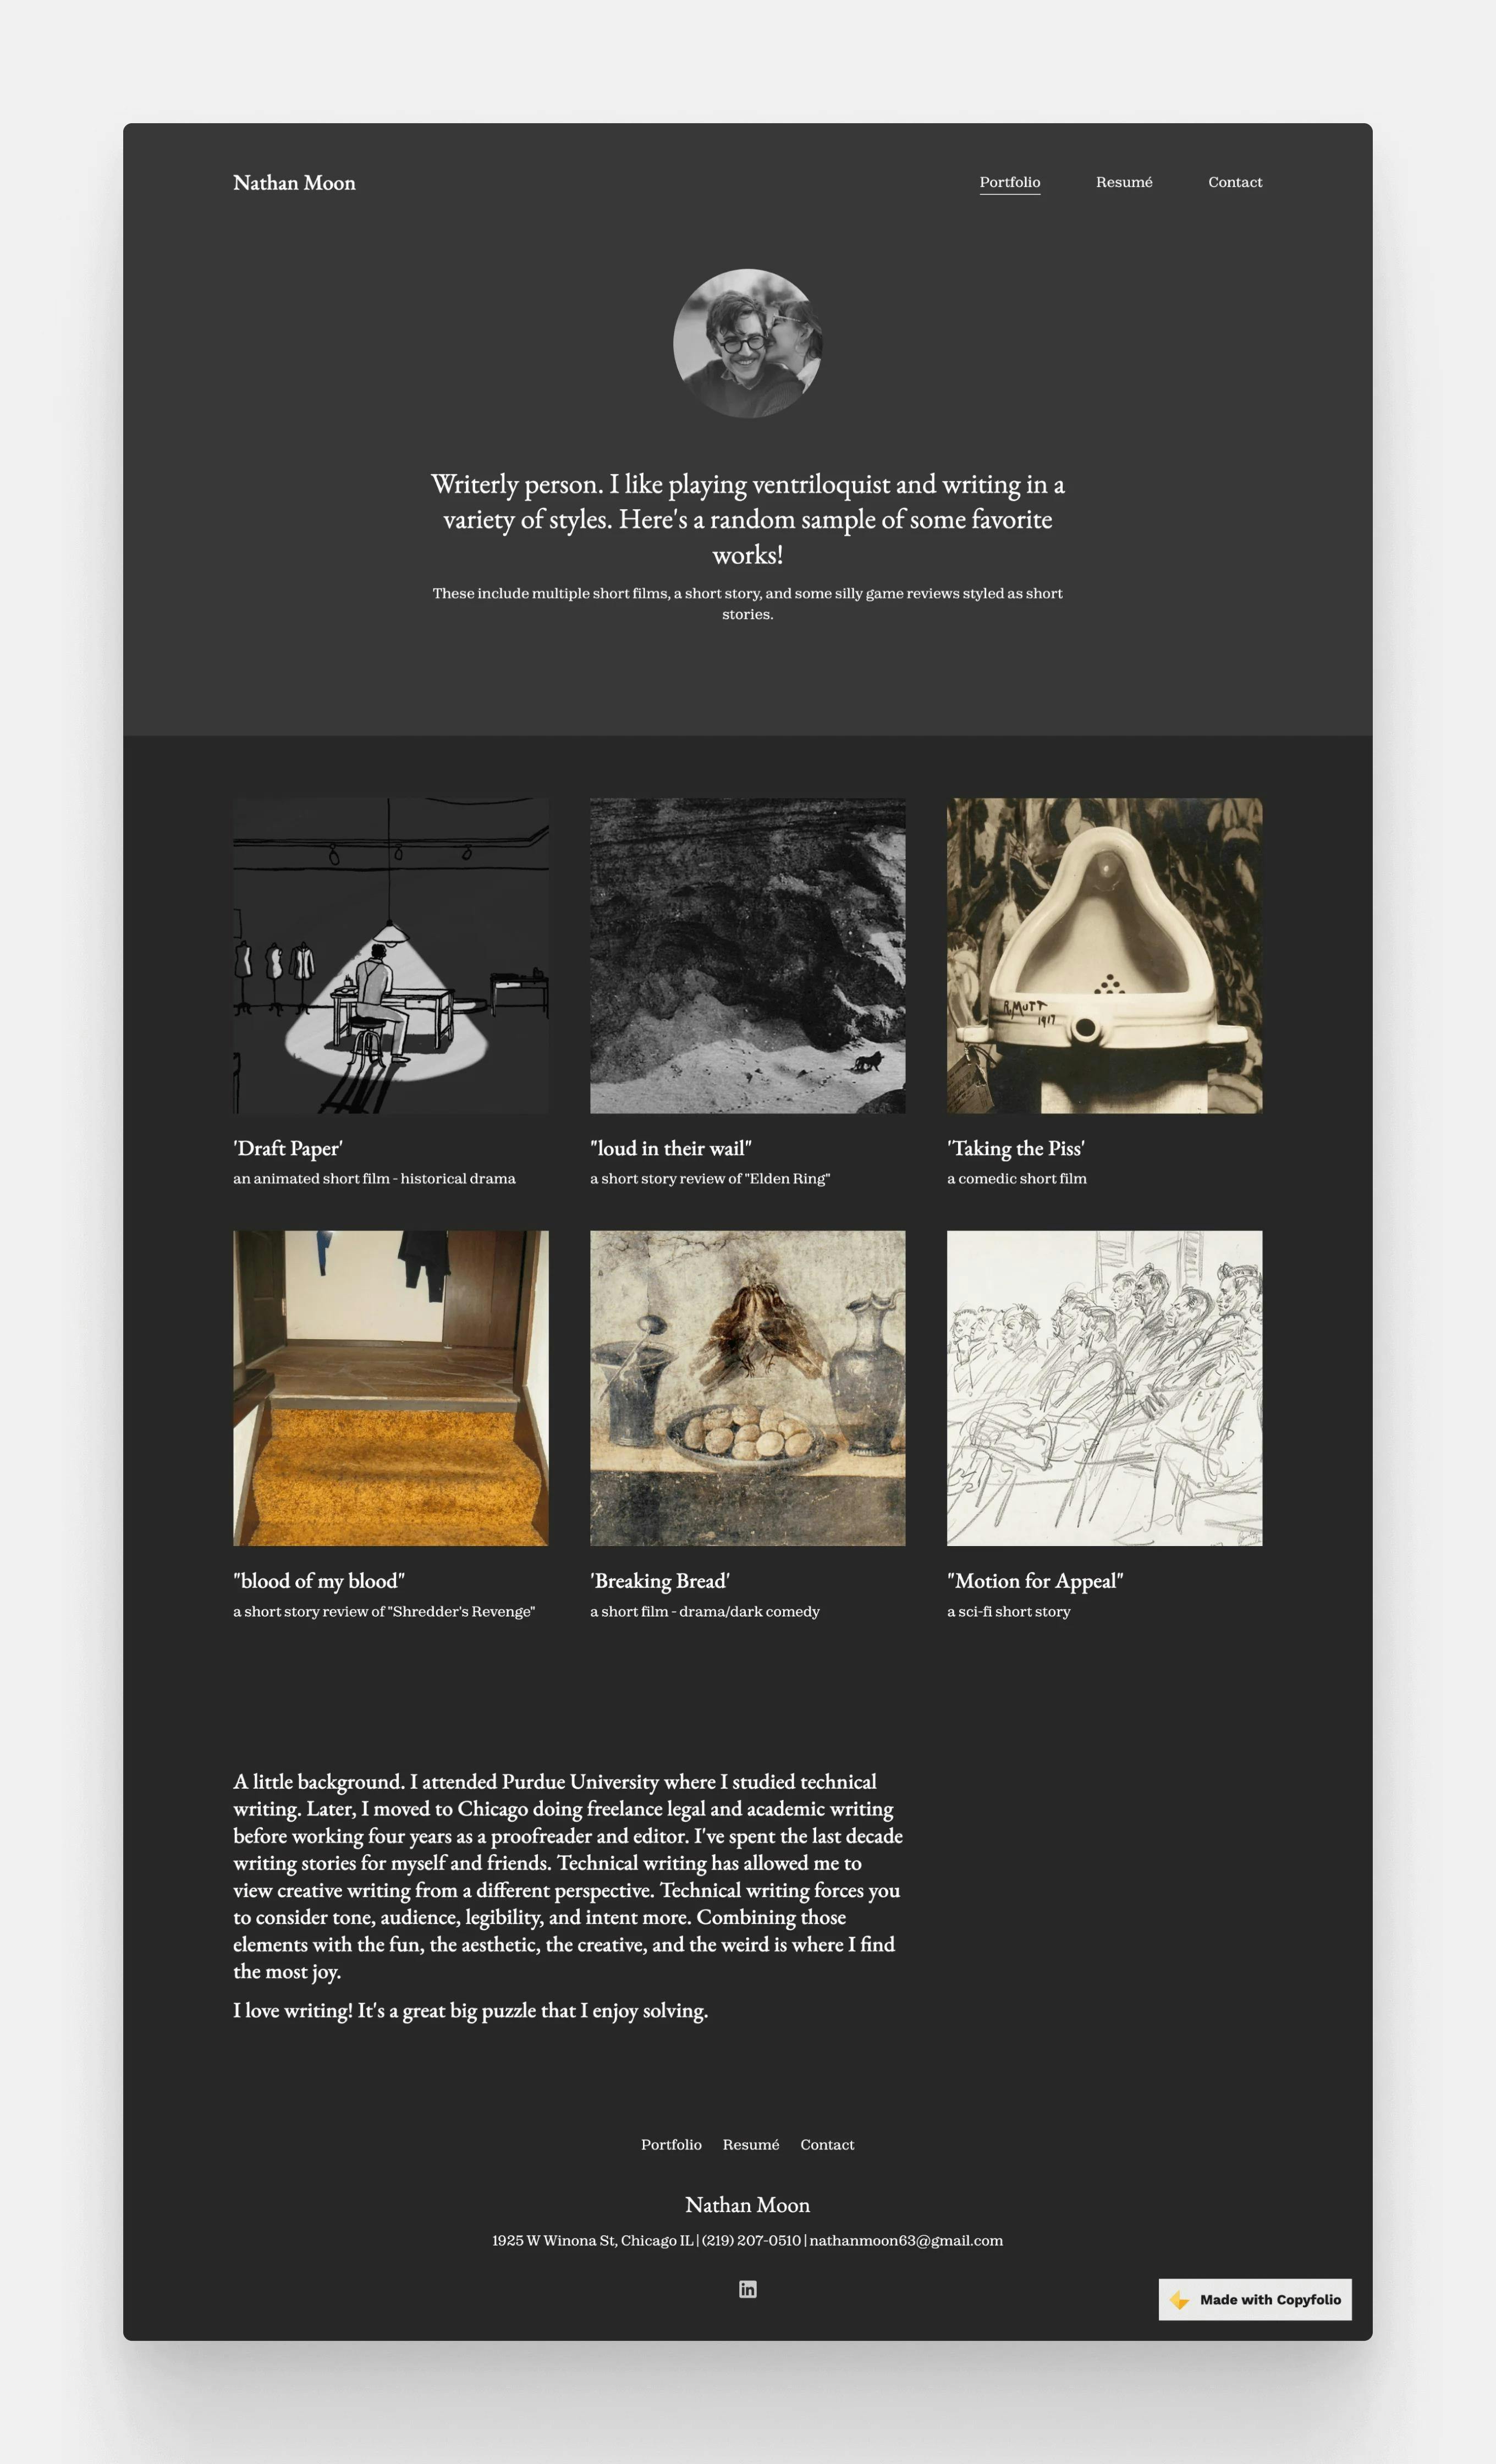 A creative writing portfolio website made by Nathan Moon with Copyfolio, featuring a dark charcoal grey background and six writing samples